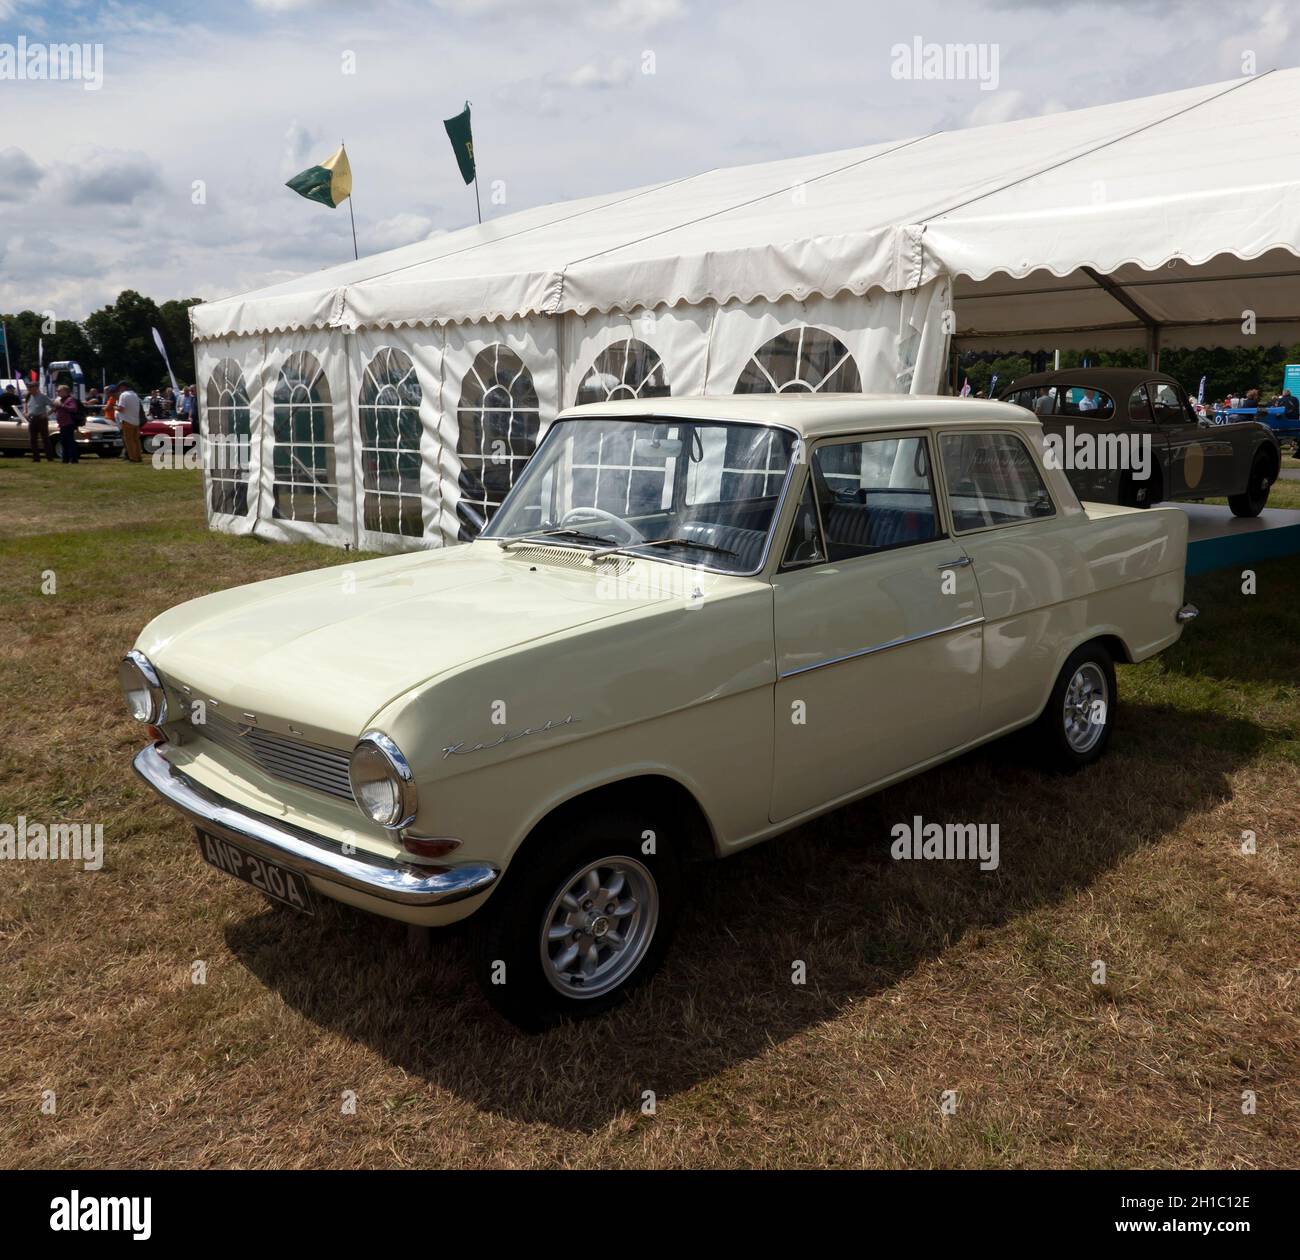 Richard Hammond's 1963 Opel Kadett 'Oliver', which he drove in the Top Gear Botswana Special, on display at the  2021 London Classic Car Show Stock Photo